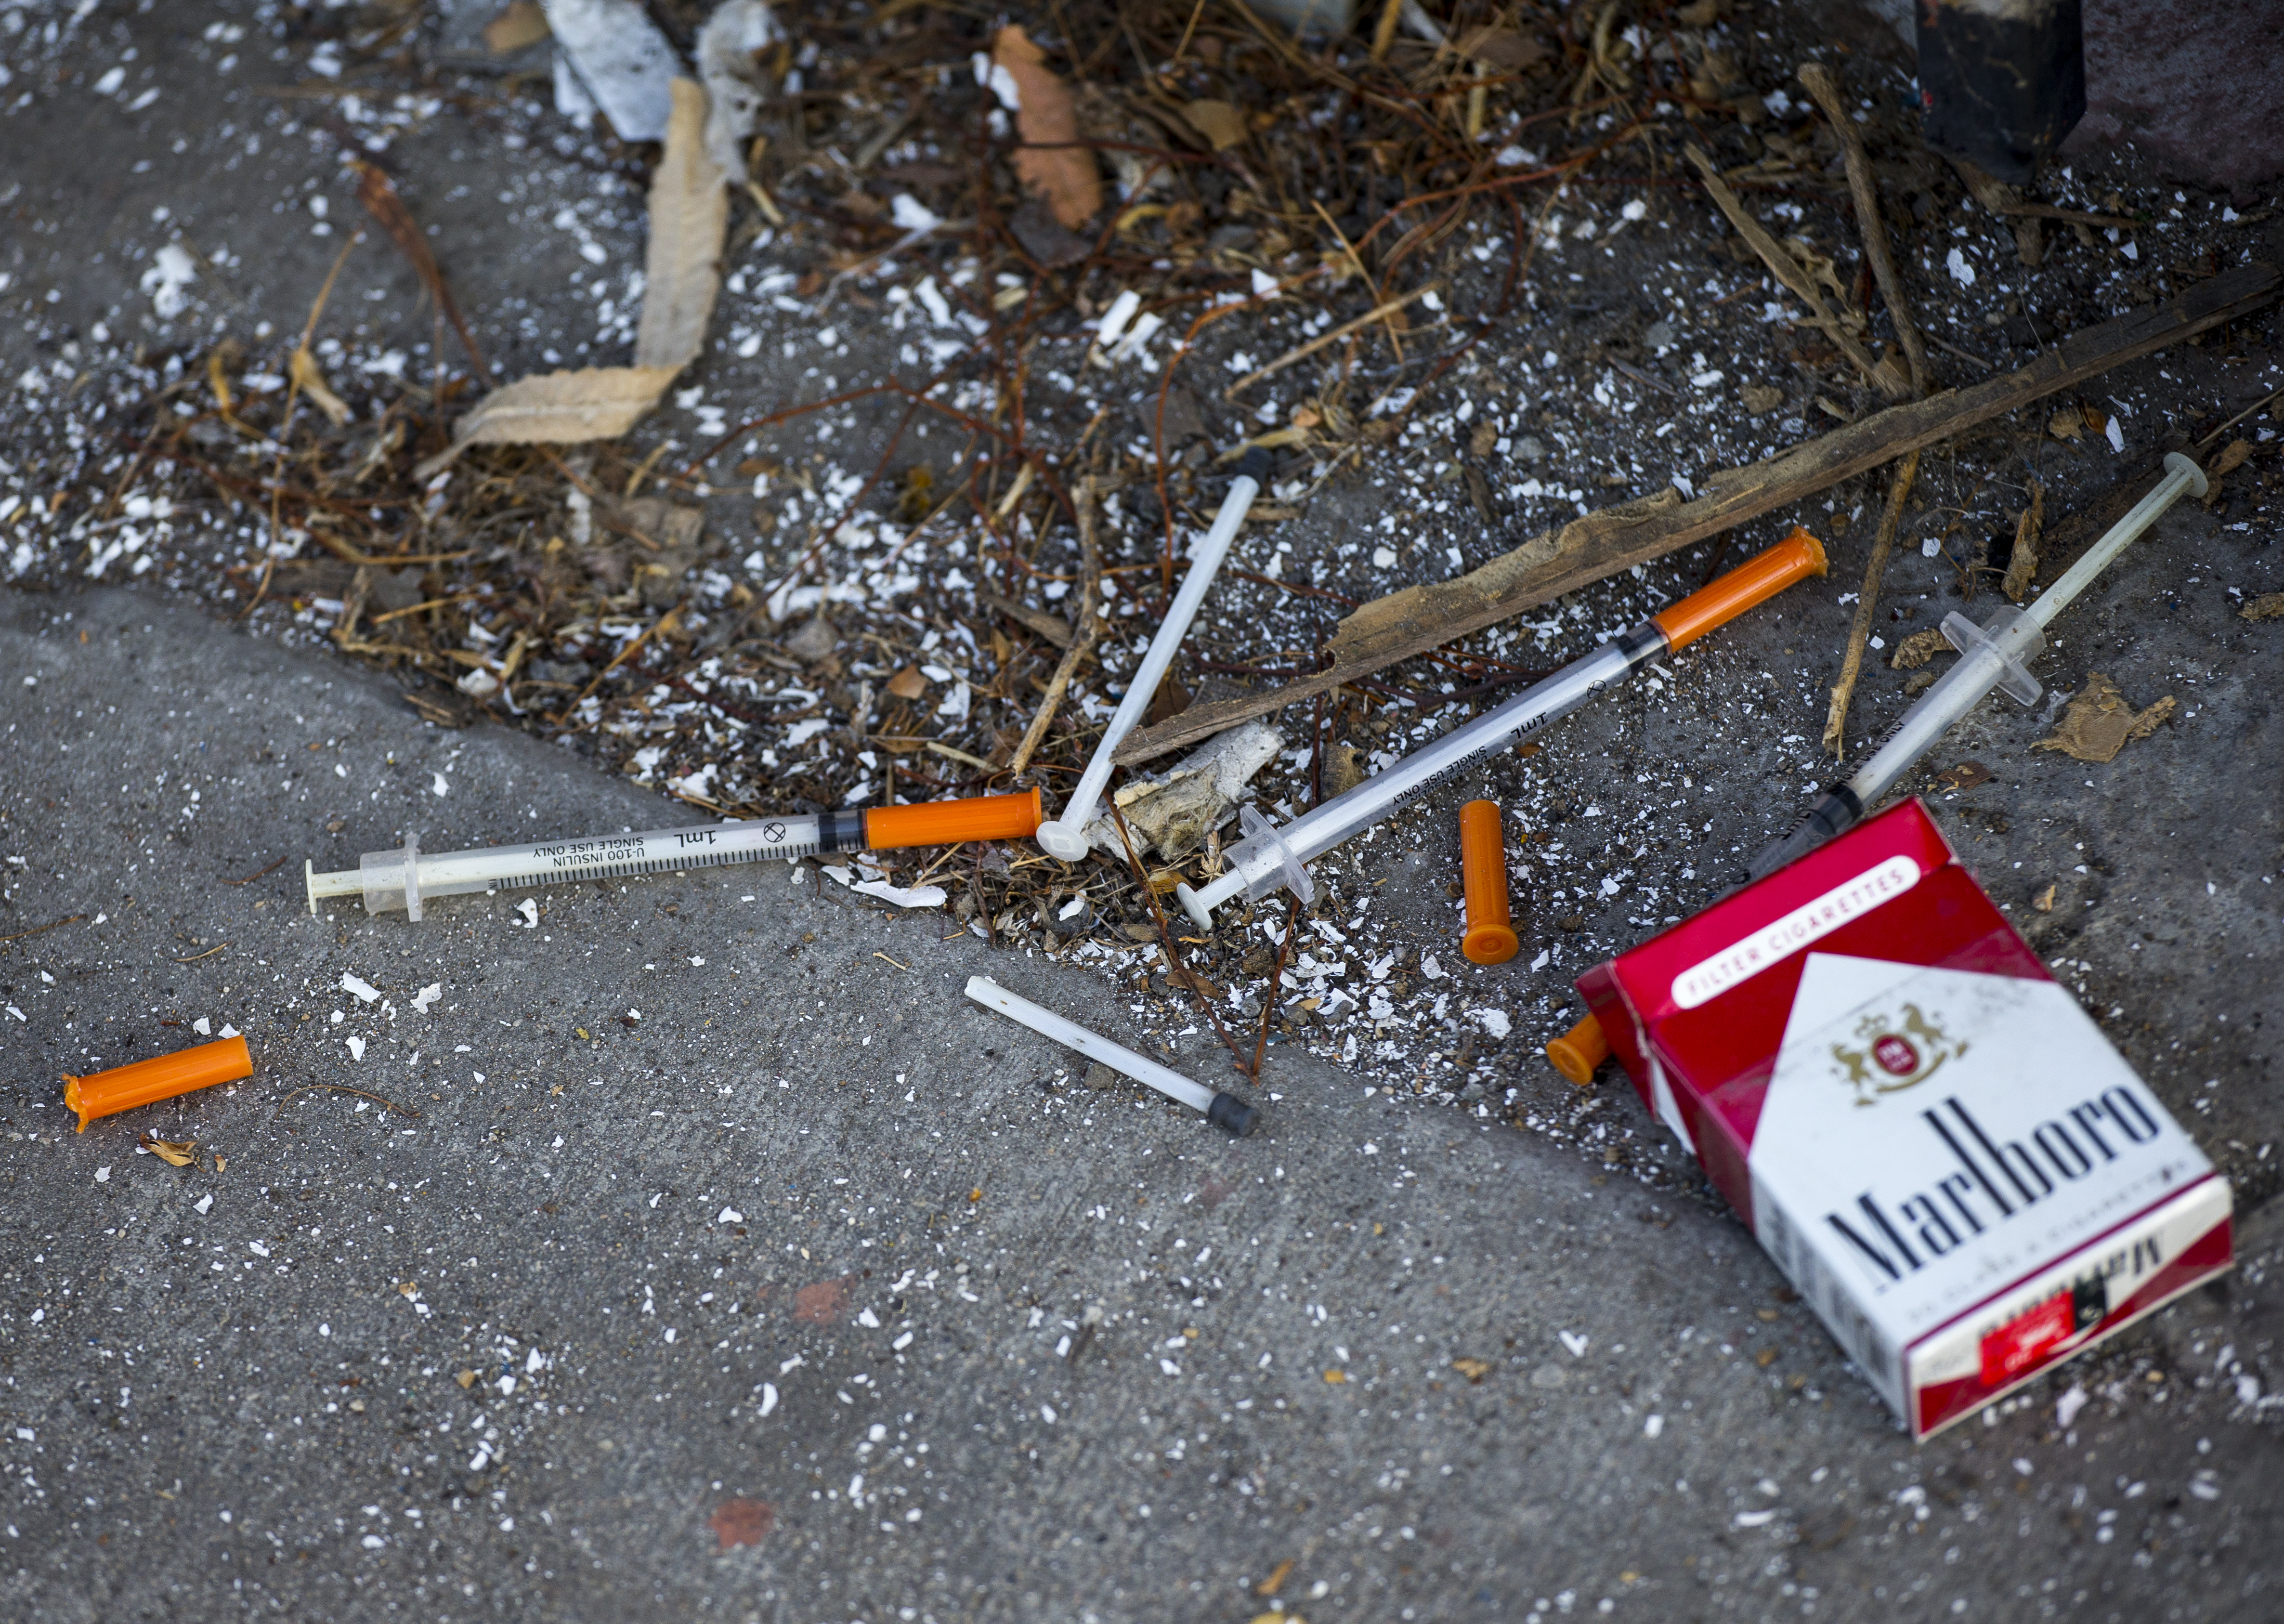 The picture show used syringes lining a sidewalk in Los Angeles, CA. (NurPhoto&mdash;NurPhoto via Getty Images)